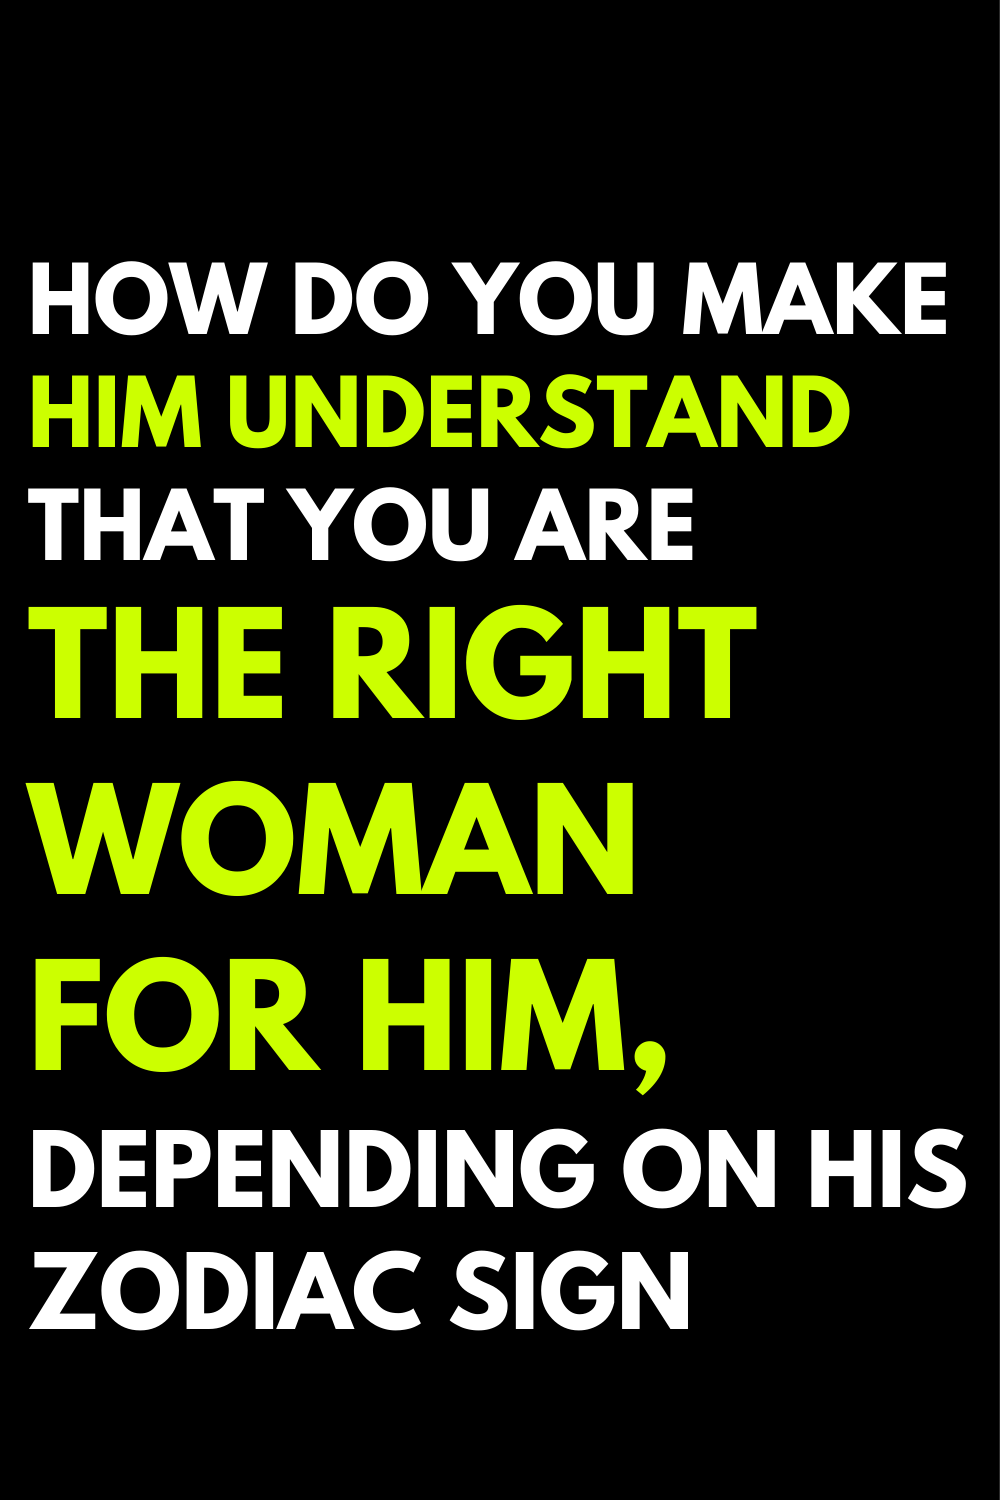 How do you make him understand that you are the right woman for him, depending on his zodiac sign